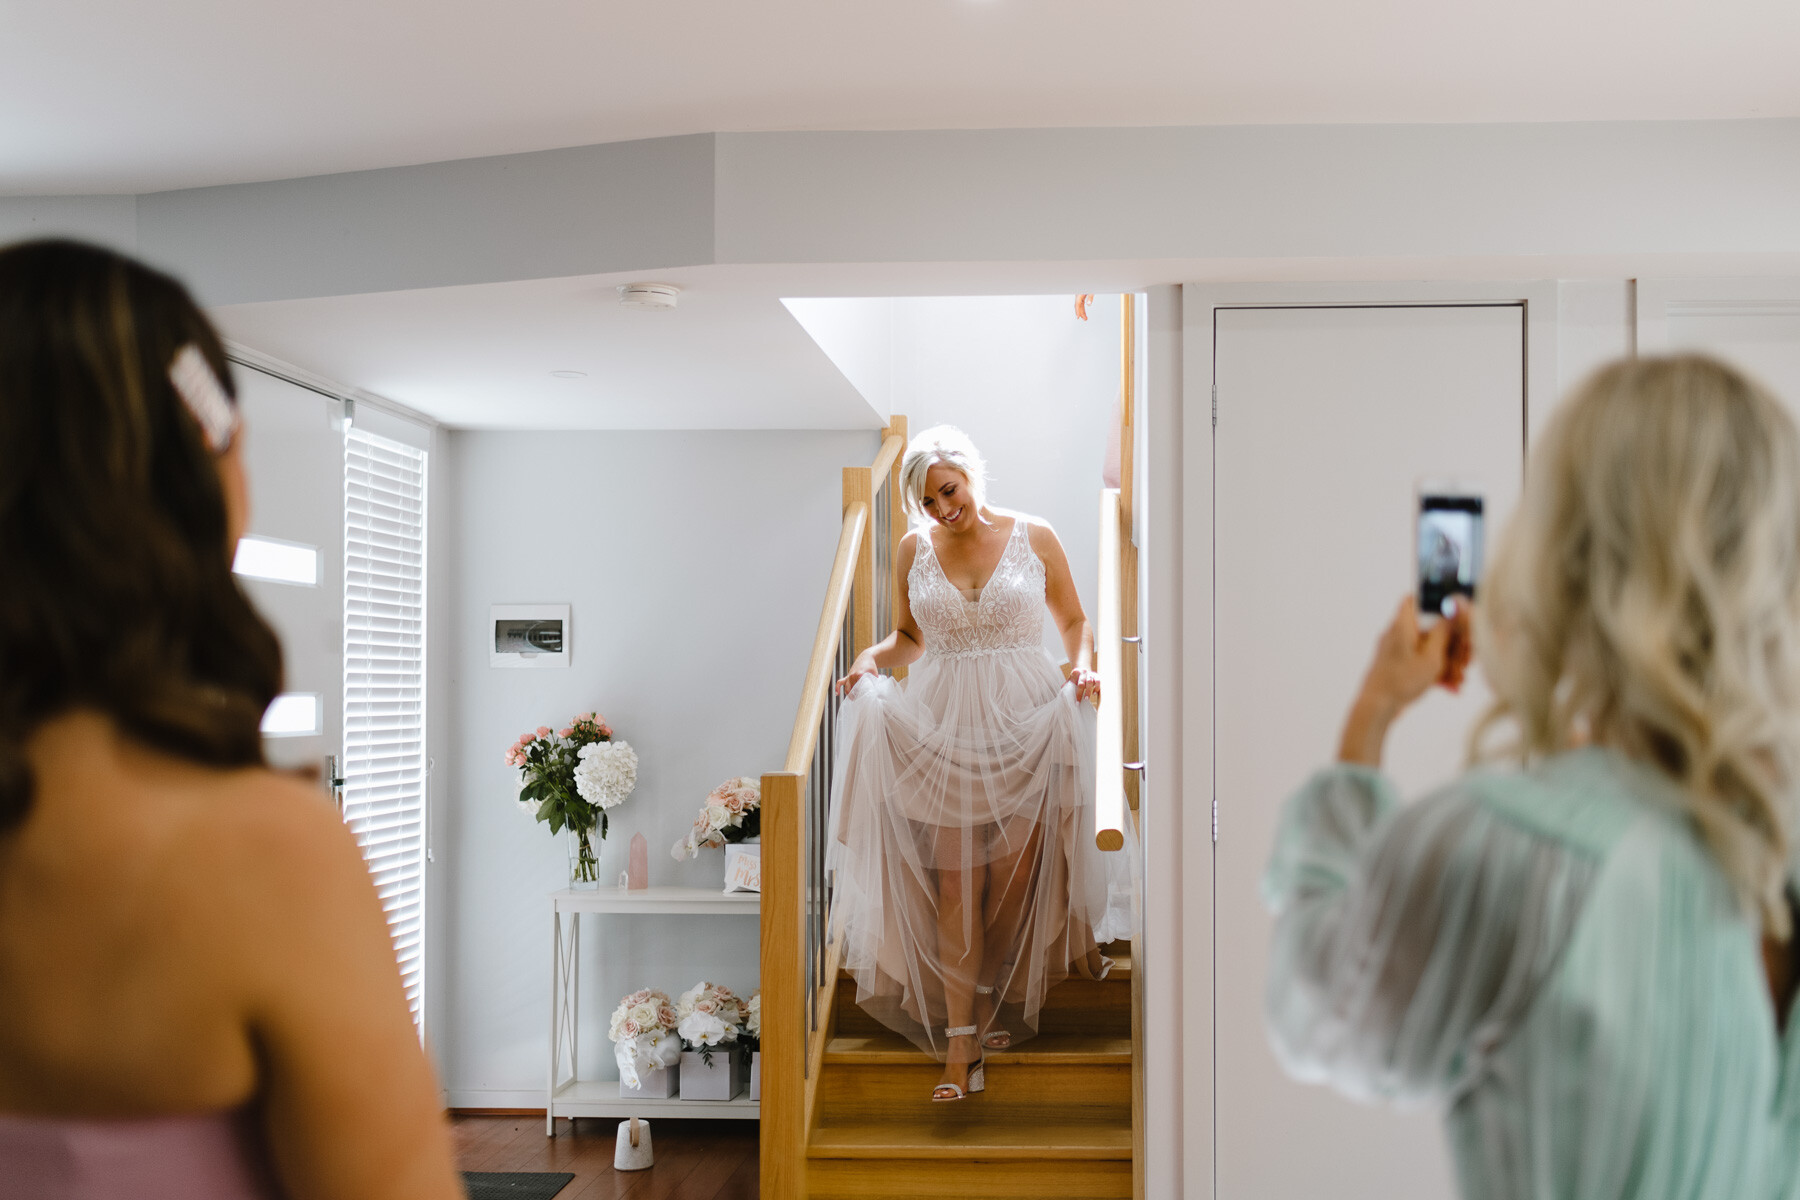 How to Look Good in Your Wedding Photos?  by Wild Romantic Photography Melbourne